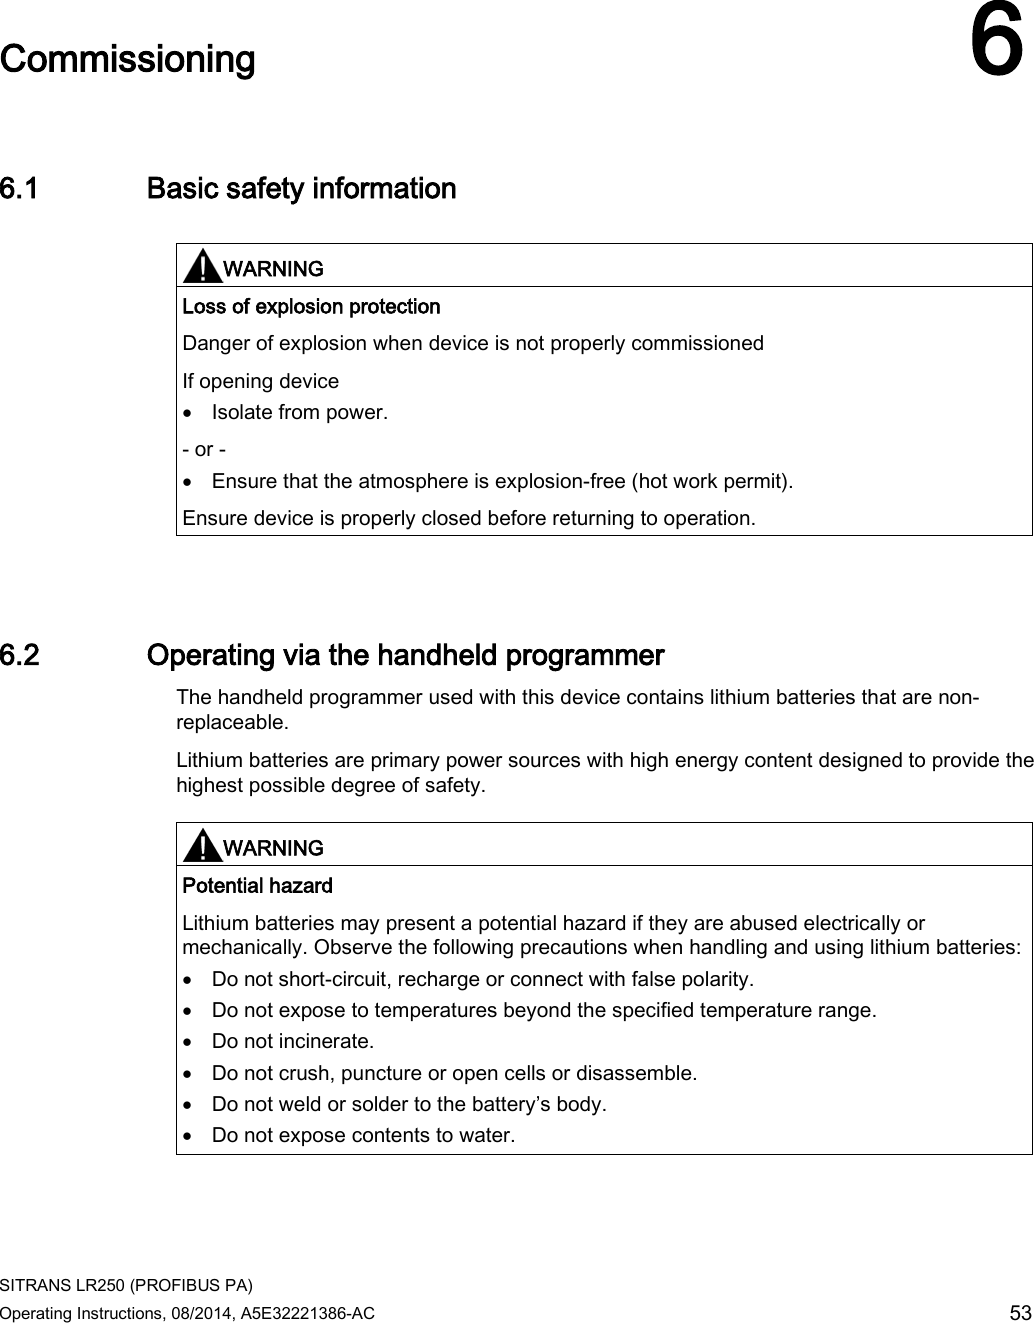  SITRANS LR250 (PROFIBUS PA) Operating Instructions, 08/2014, A5E32221386-AC 53  Commissioning 6 6.1 Basic safety information   WARNING Loss of explosion protection Danger of explosion when device is not properly commissioned If opening device • Isolate from power. - or - • Ensure that the atmosphere is explosion-free (hot work permit). Ensure device is properly closed before returning to operation.  6.2 Operating via the handheld programmer The handheld programmer used with this device contains lithium batteries that are non-replaceable. Lithium batteries are primary power sources with high energy content designed to provide the highest possible degree of safety.    WARNING Potential hazard Lithium batteries may present a potential hazard if they are abused electrically or mechanically. Observe the following precautions when handling and using lithium batteries: • Do not short-circuit, recharge or connect with false polarity. • Do not expose to temperatures beyond the specified temperature range. • Do not incinerate. • Do not crush, puncture or open cells or disassemble. • Do not weld or solder to the battery’s body. • Do not expose contents to water.  